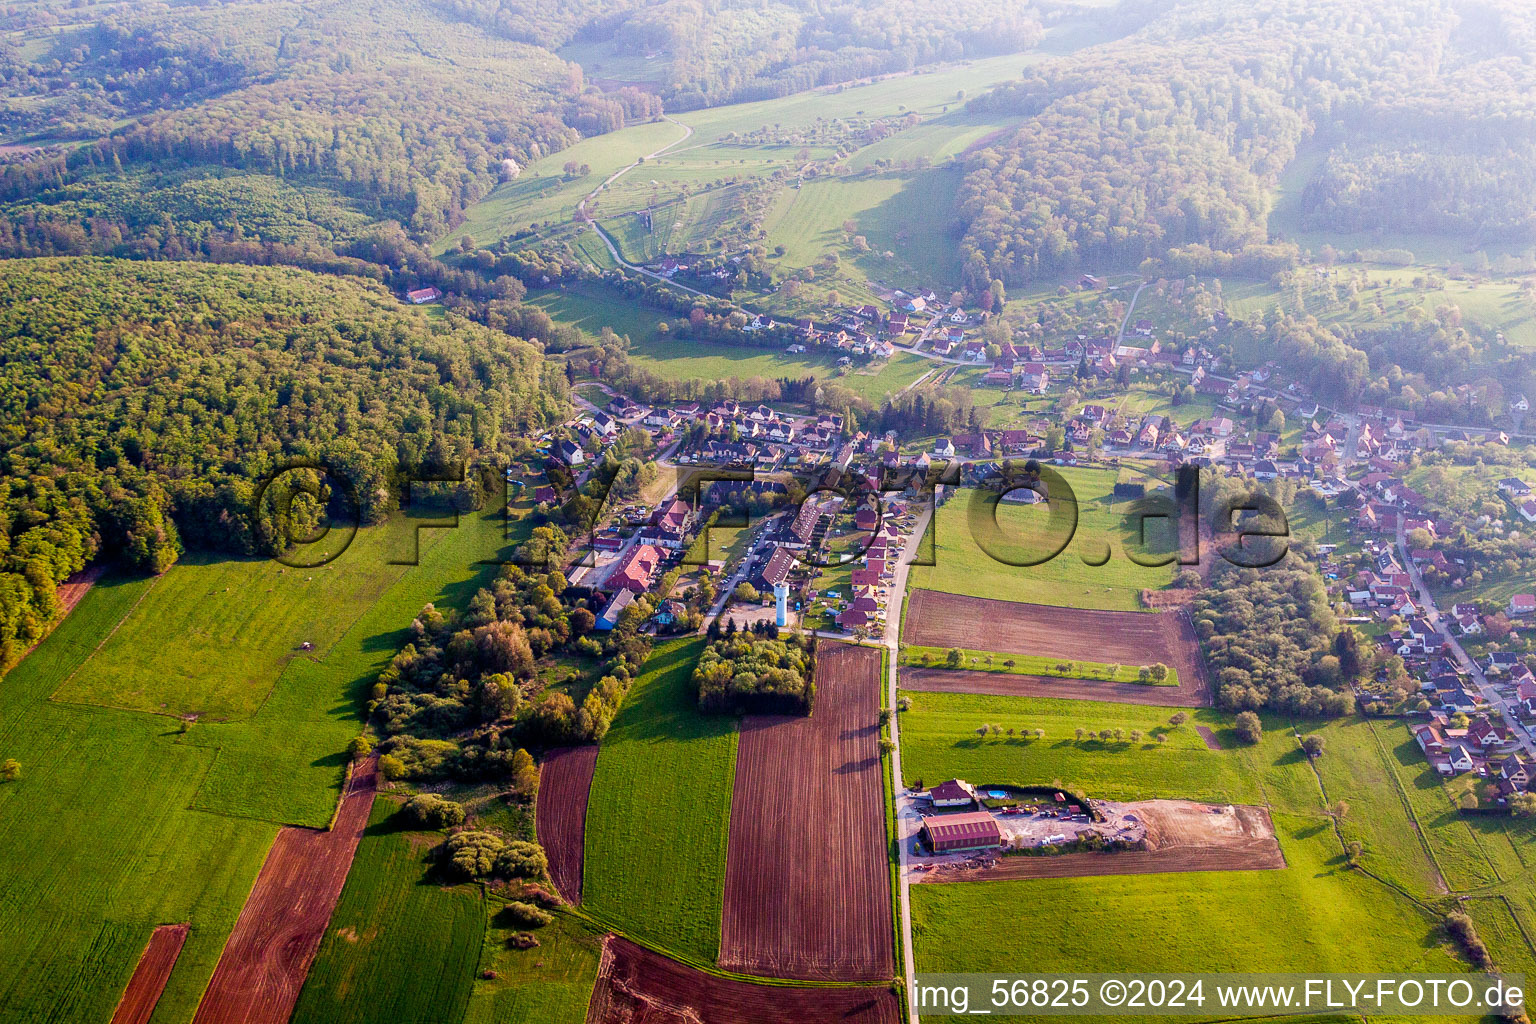 Village - view on the edge of agricultural fields and farmland in Langensoultzbach in Grand Est, France